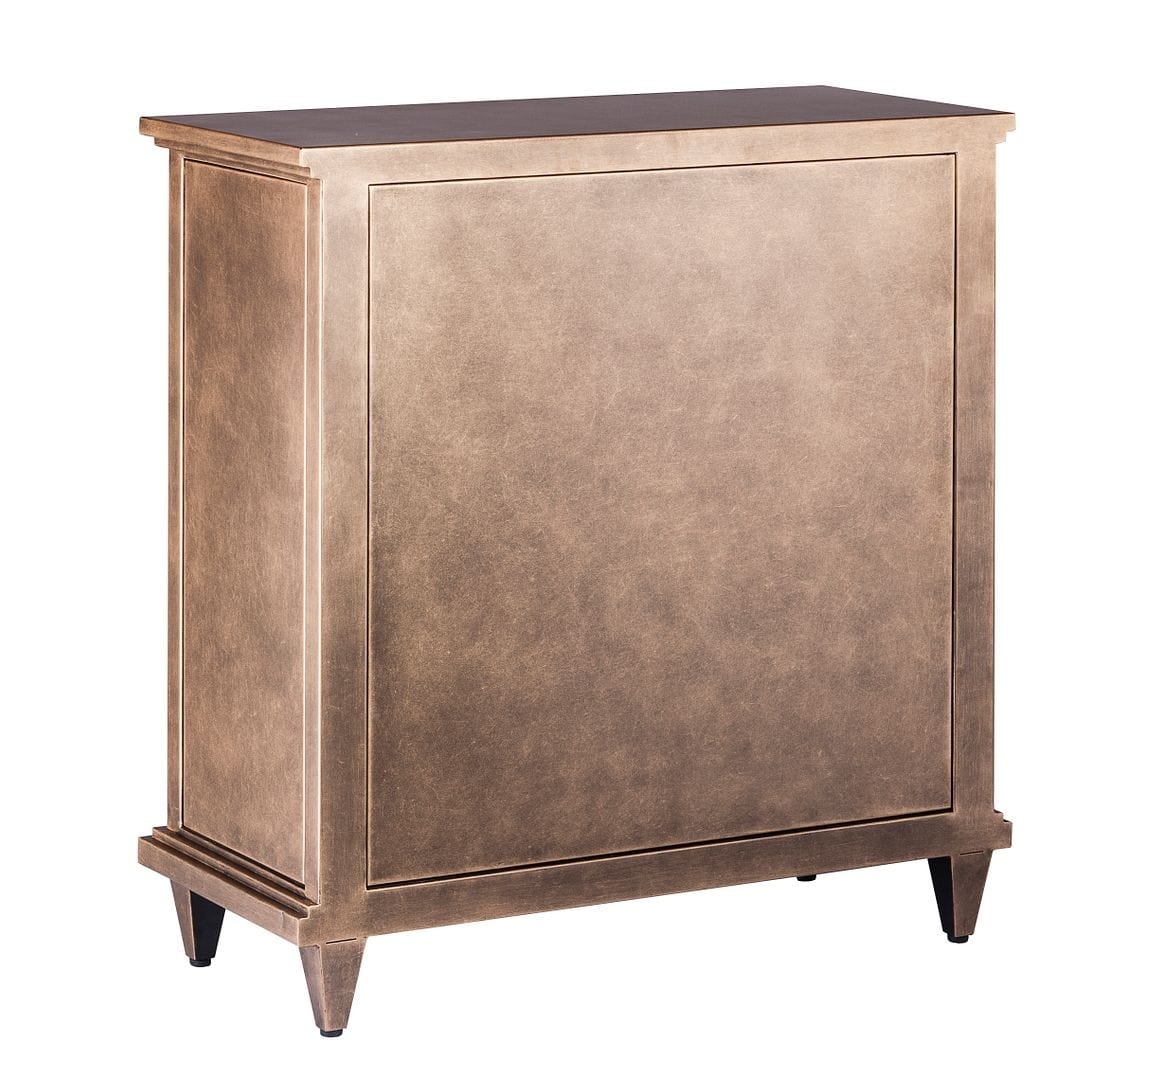 Brass Finish Iron Glass Buffet Sideboard Cabinet with 3-Level Storage